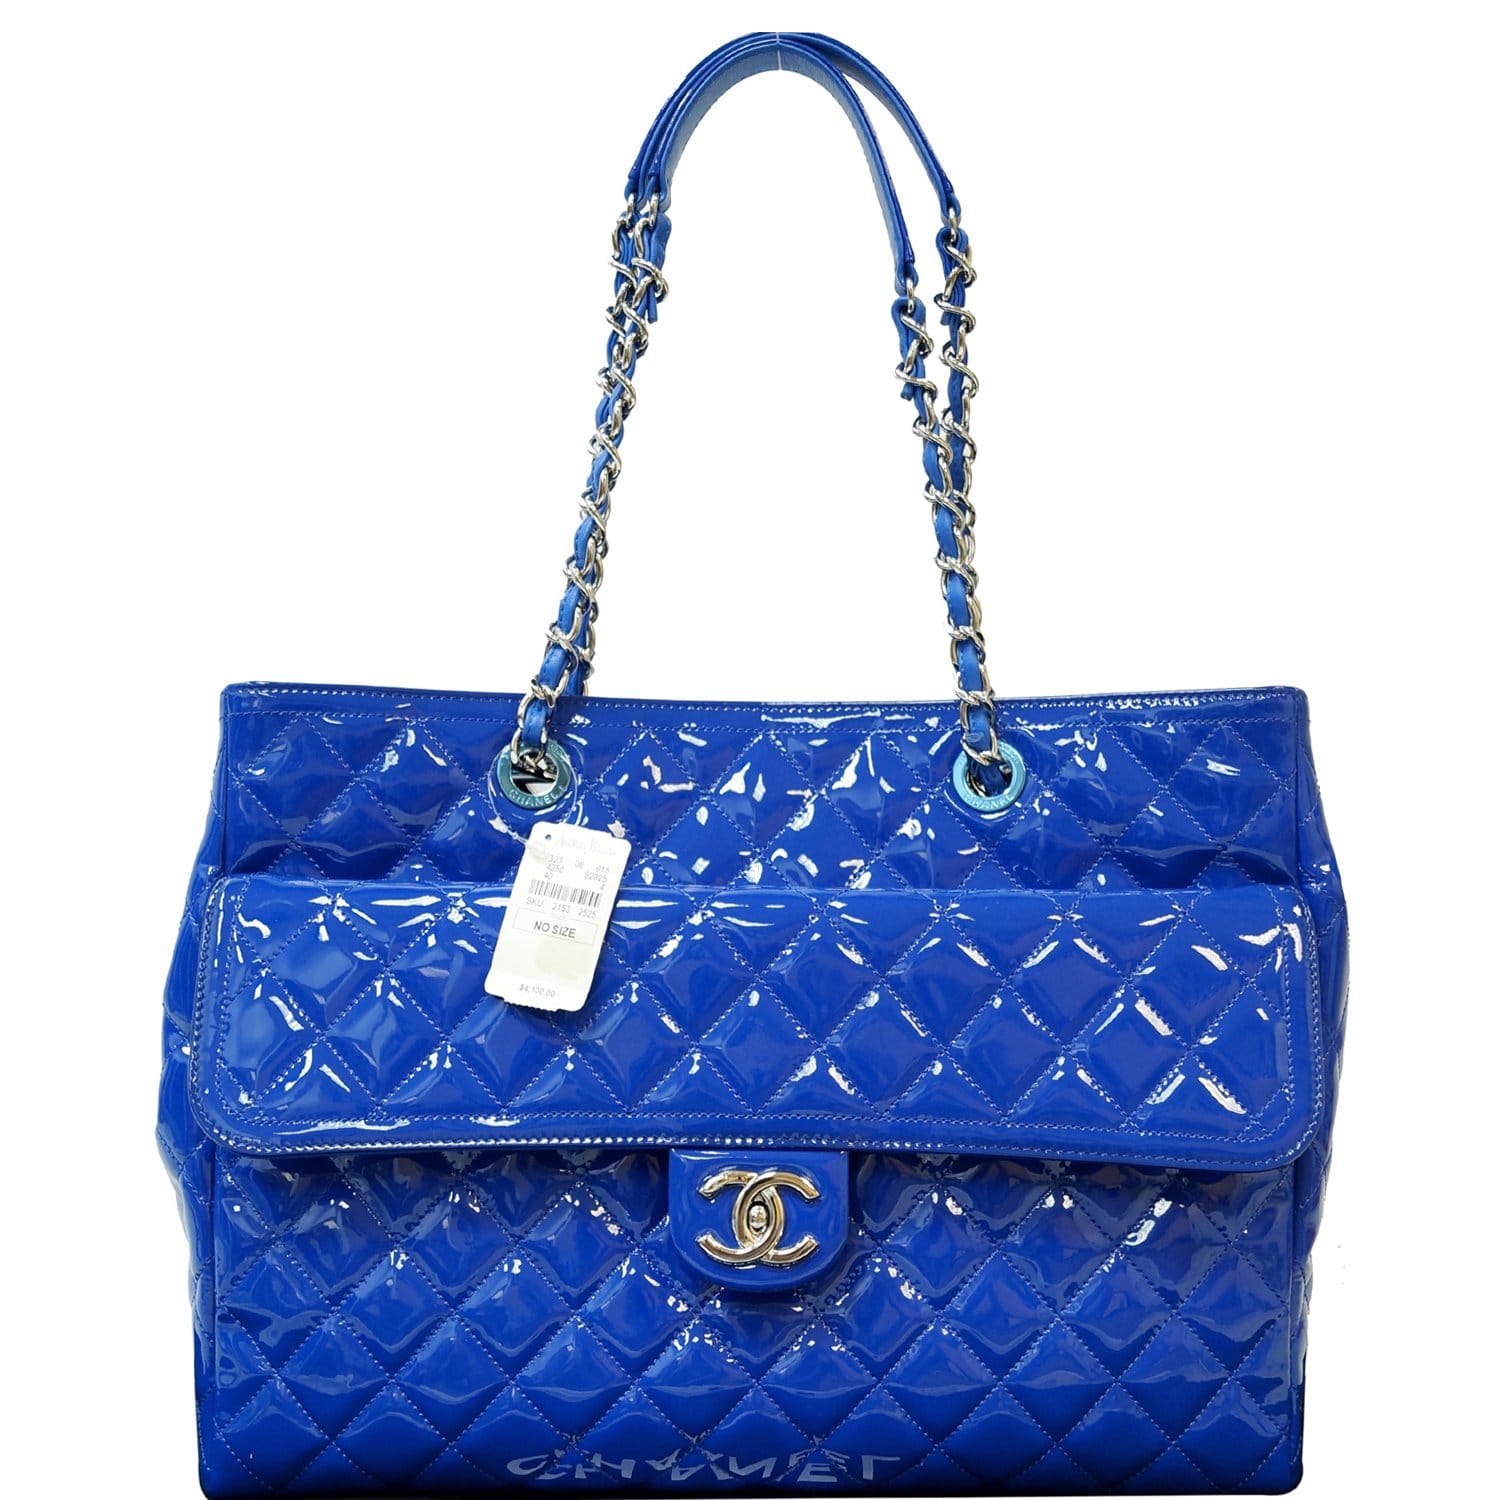 CHANEL Tote Quilted Bags & Handbags for Women, Authenticity Guaranteed